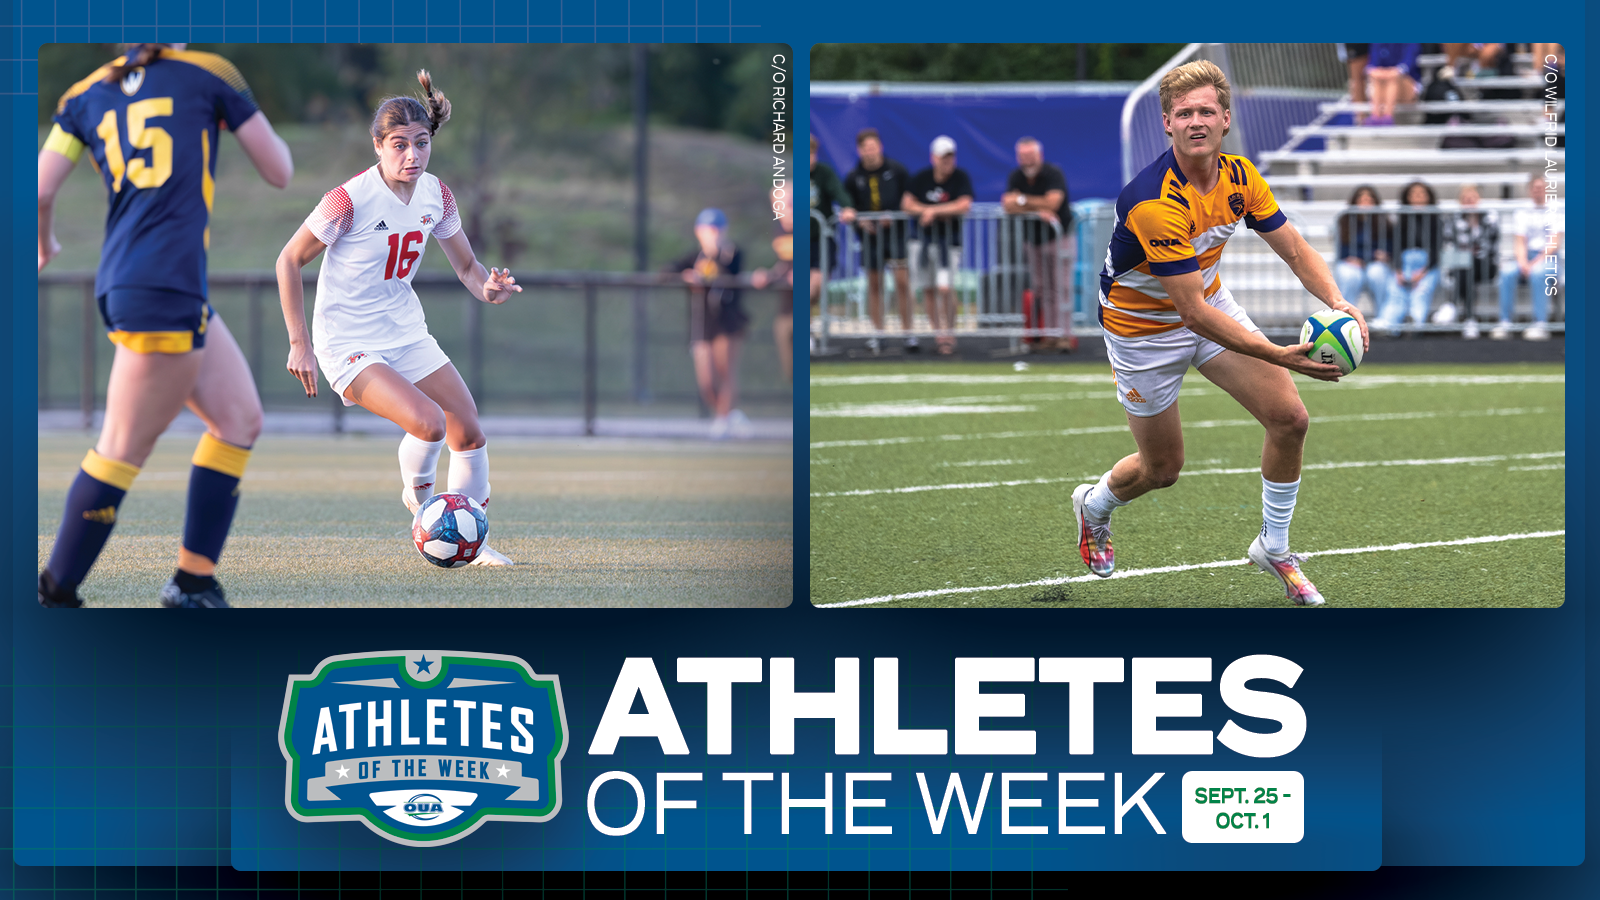 Navy blue background with Green highlights. Bottom banner has OUA athletes of the week logo and text saying 